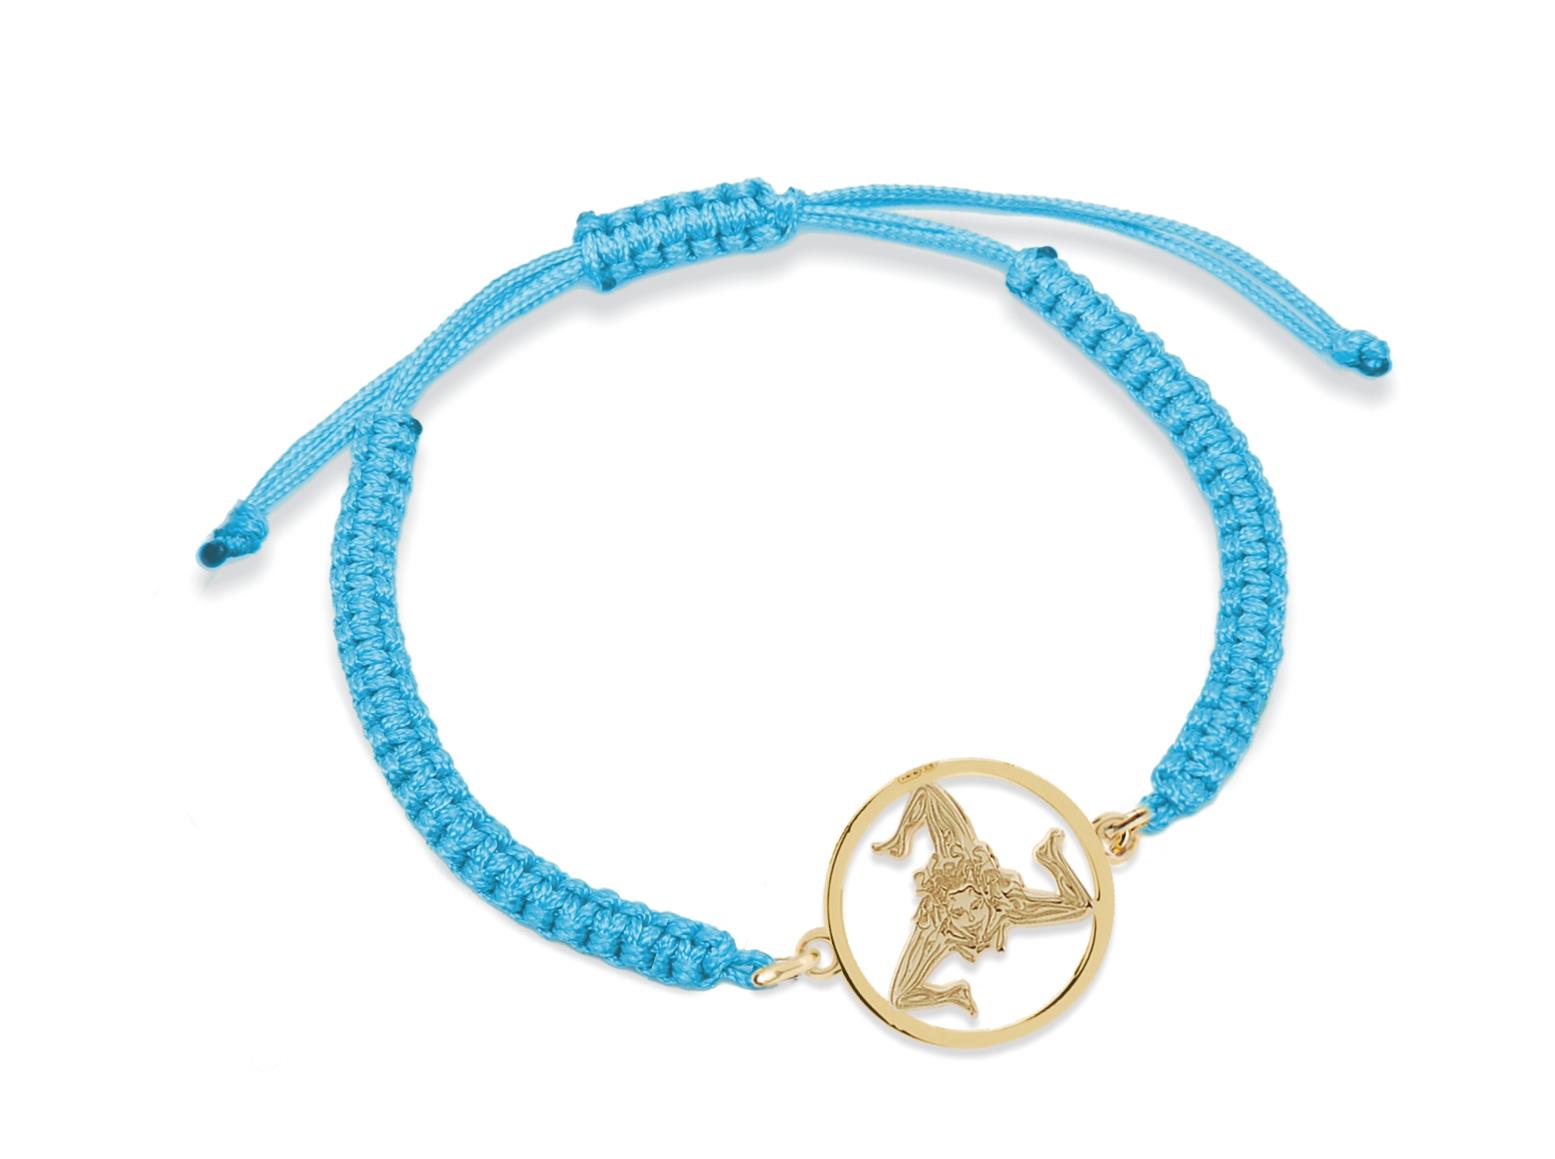 Light blue nylon bracelet with the Trinacria symbol enclosed in the golden silver circle - MY SICILY